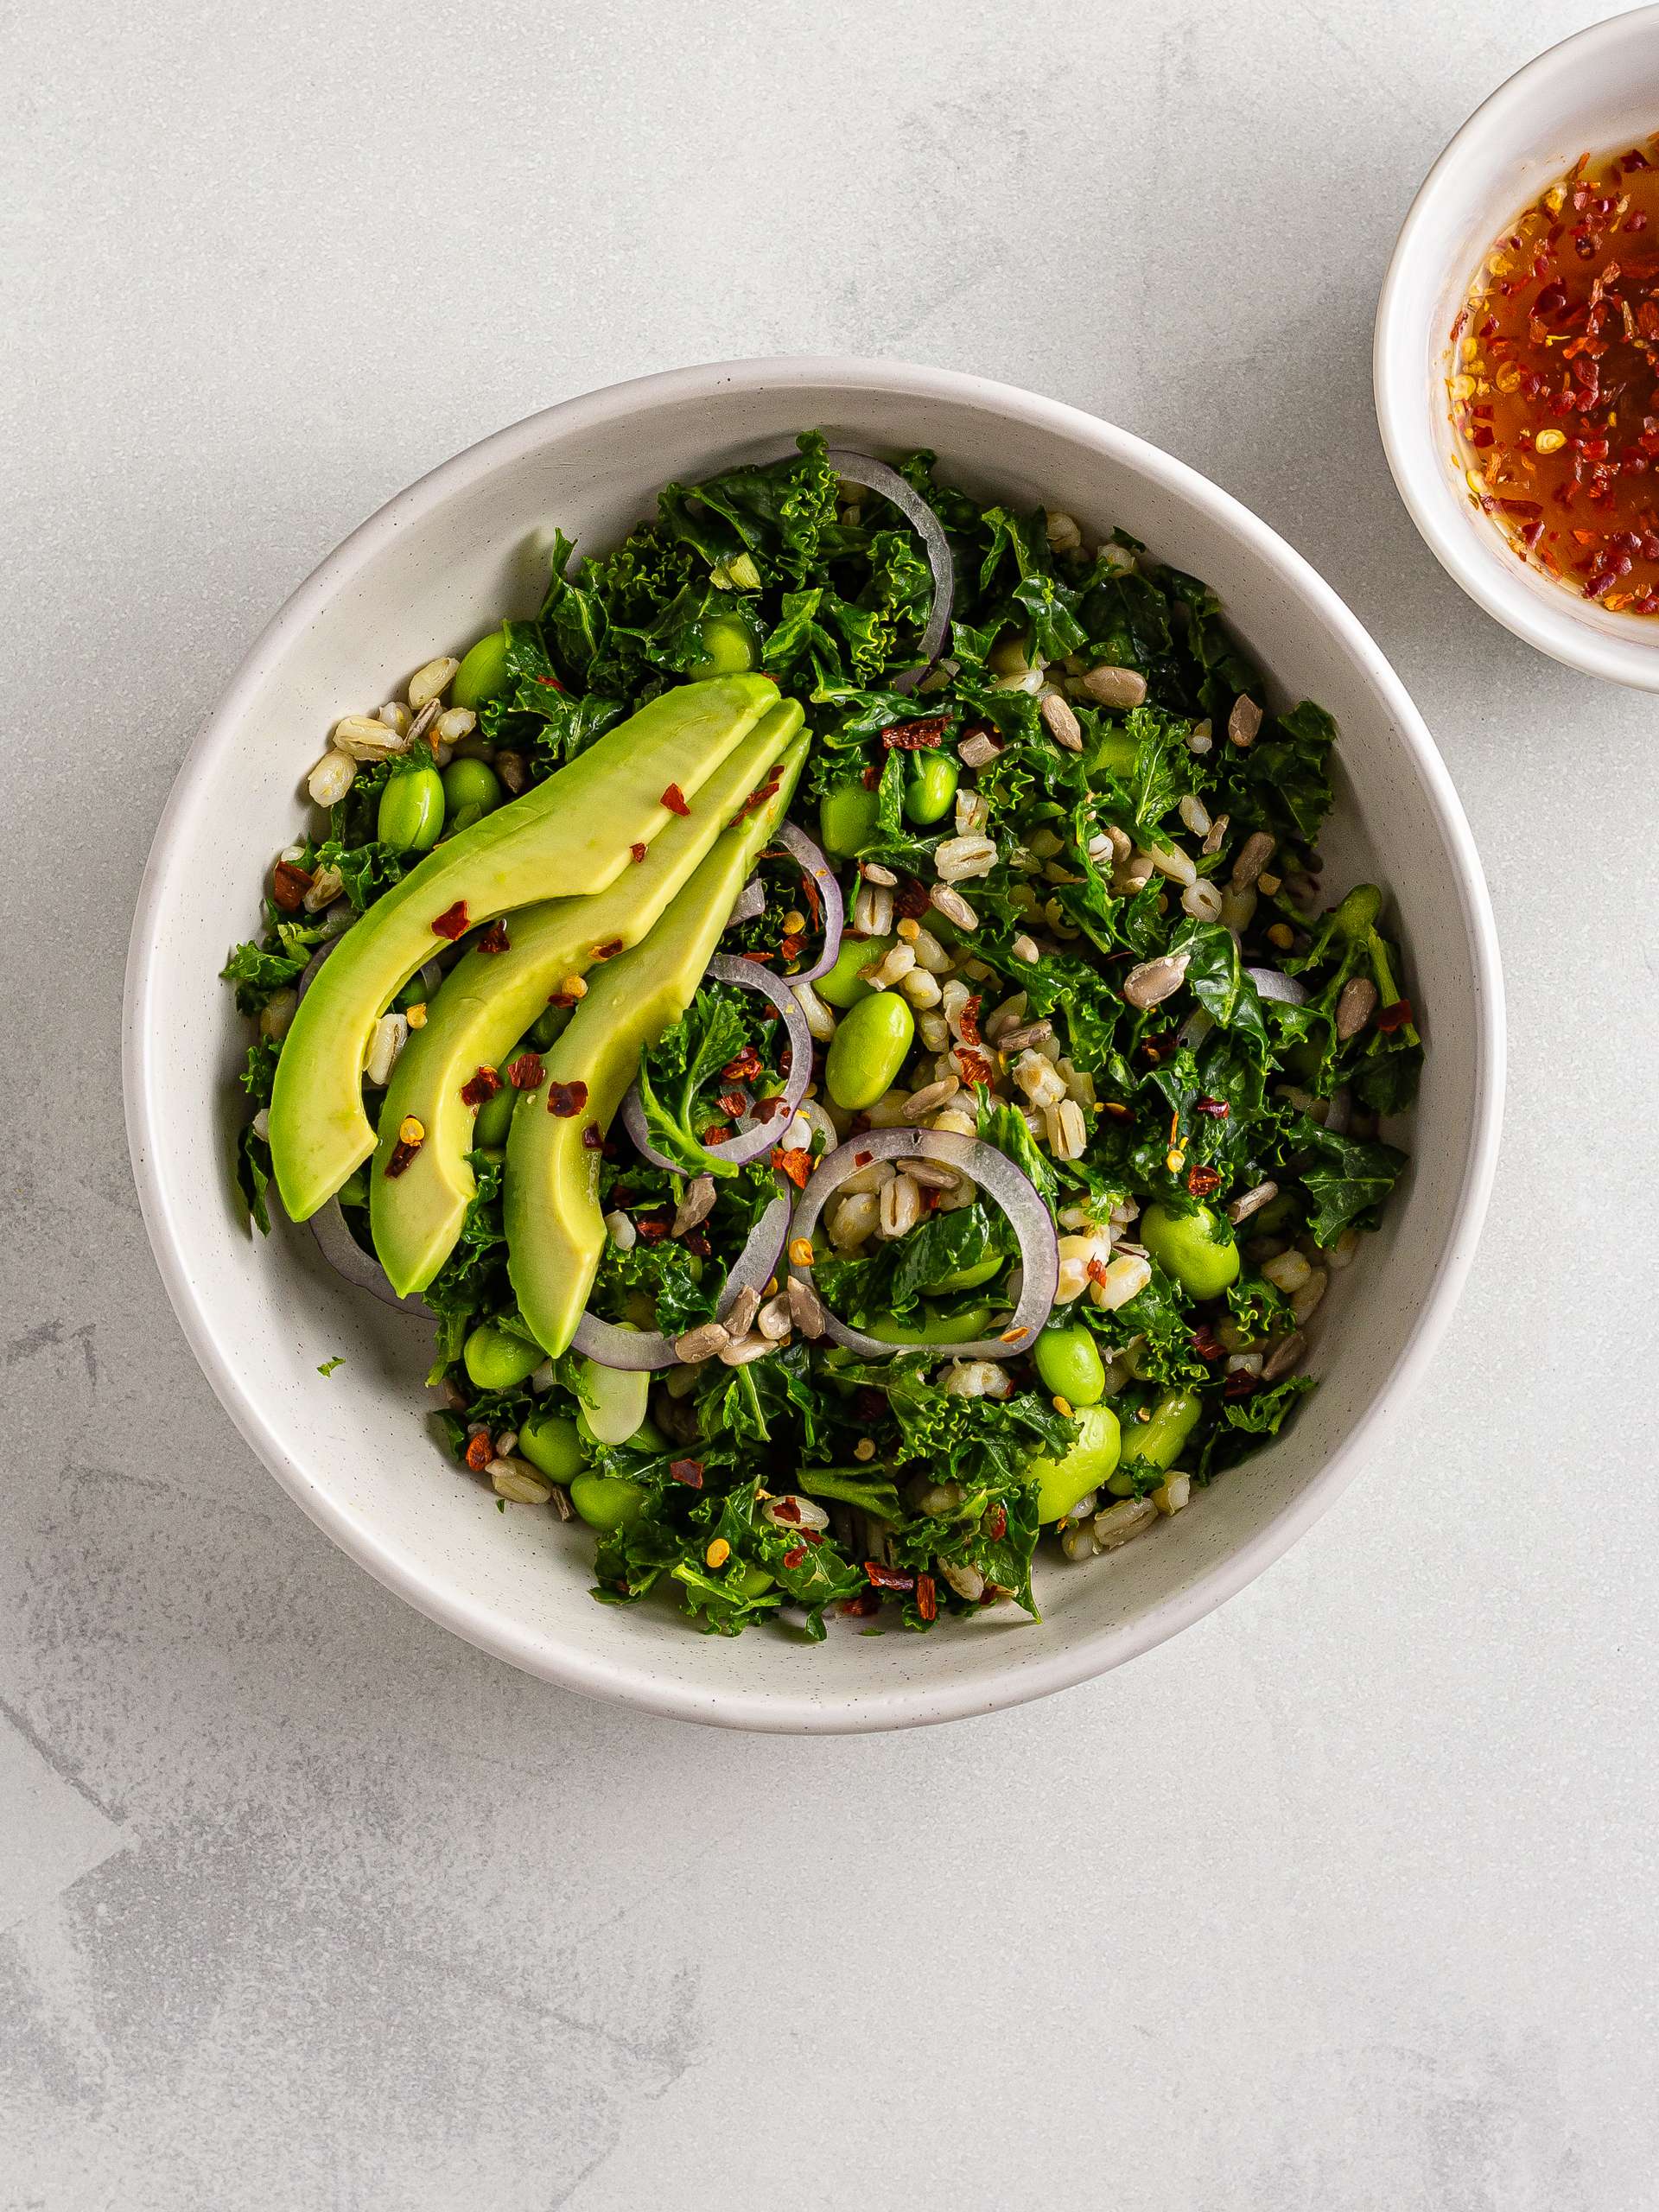 Kale edamame salad with avocado and red onions